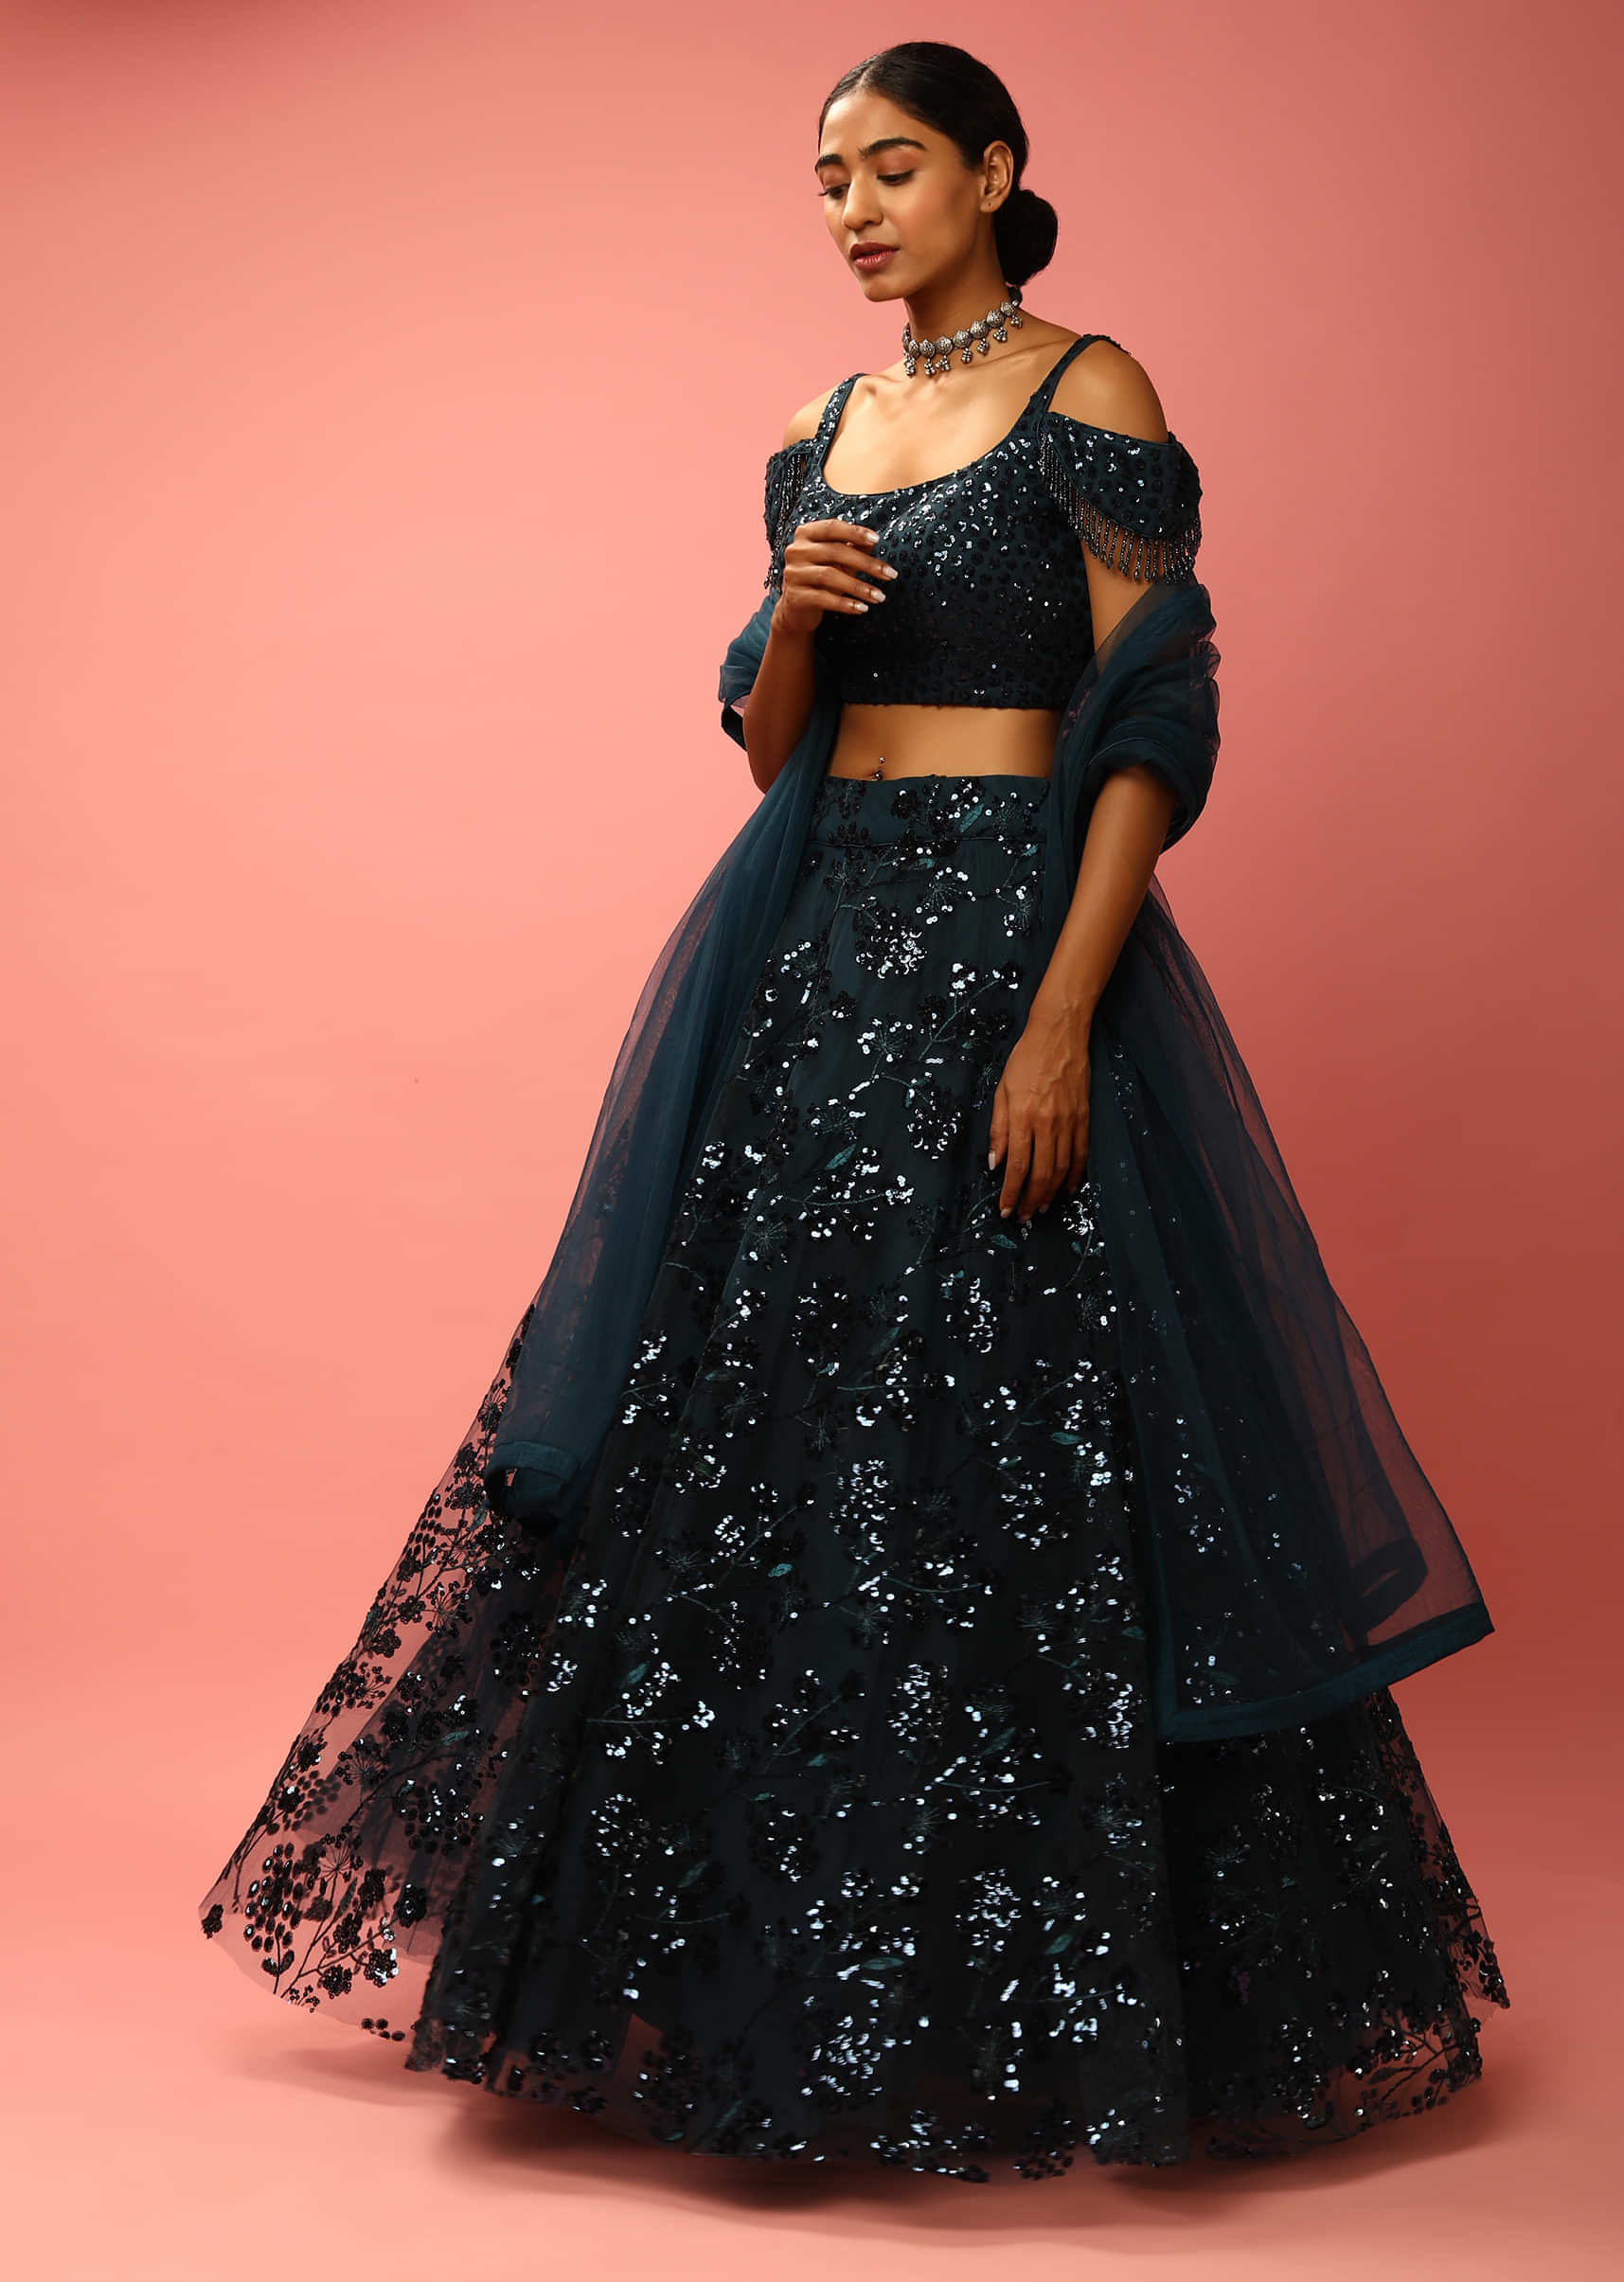 Dark Teal Lehenga Choli In Net With Sequins Embroidered Floral Motifs And Cold Shoulder Sleeves